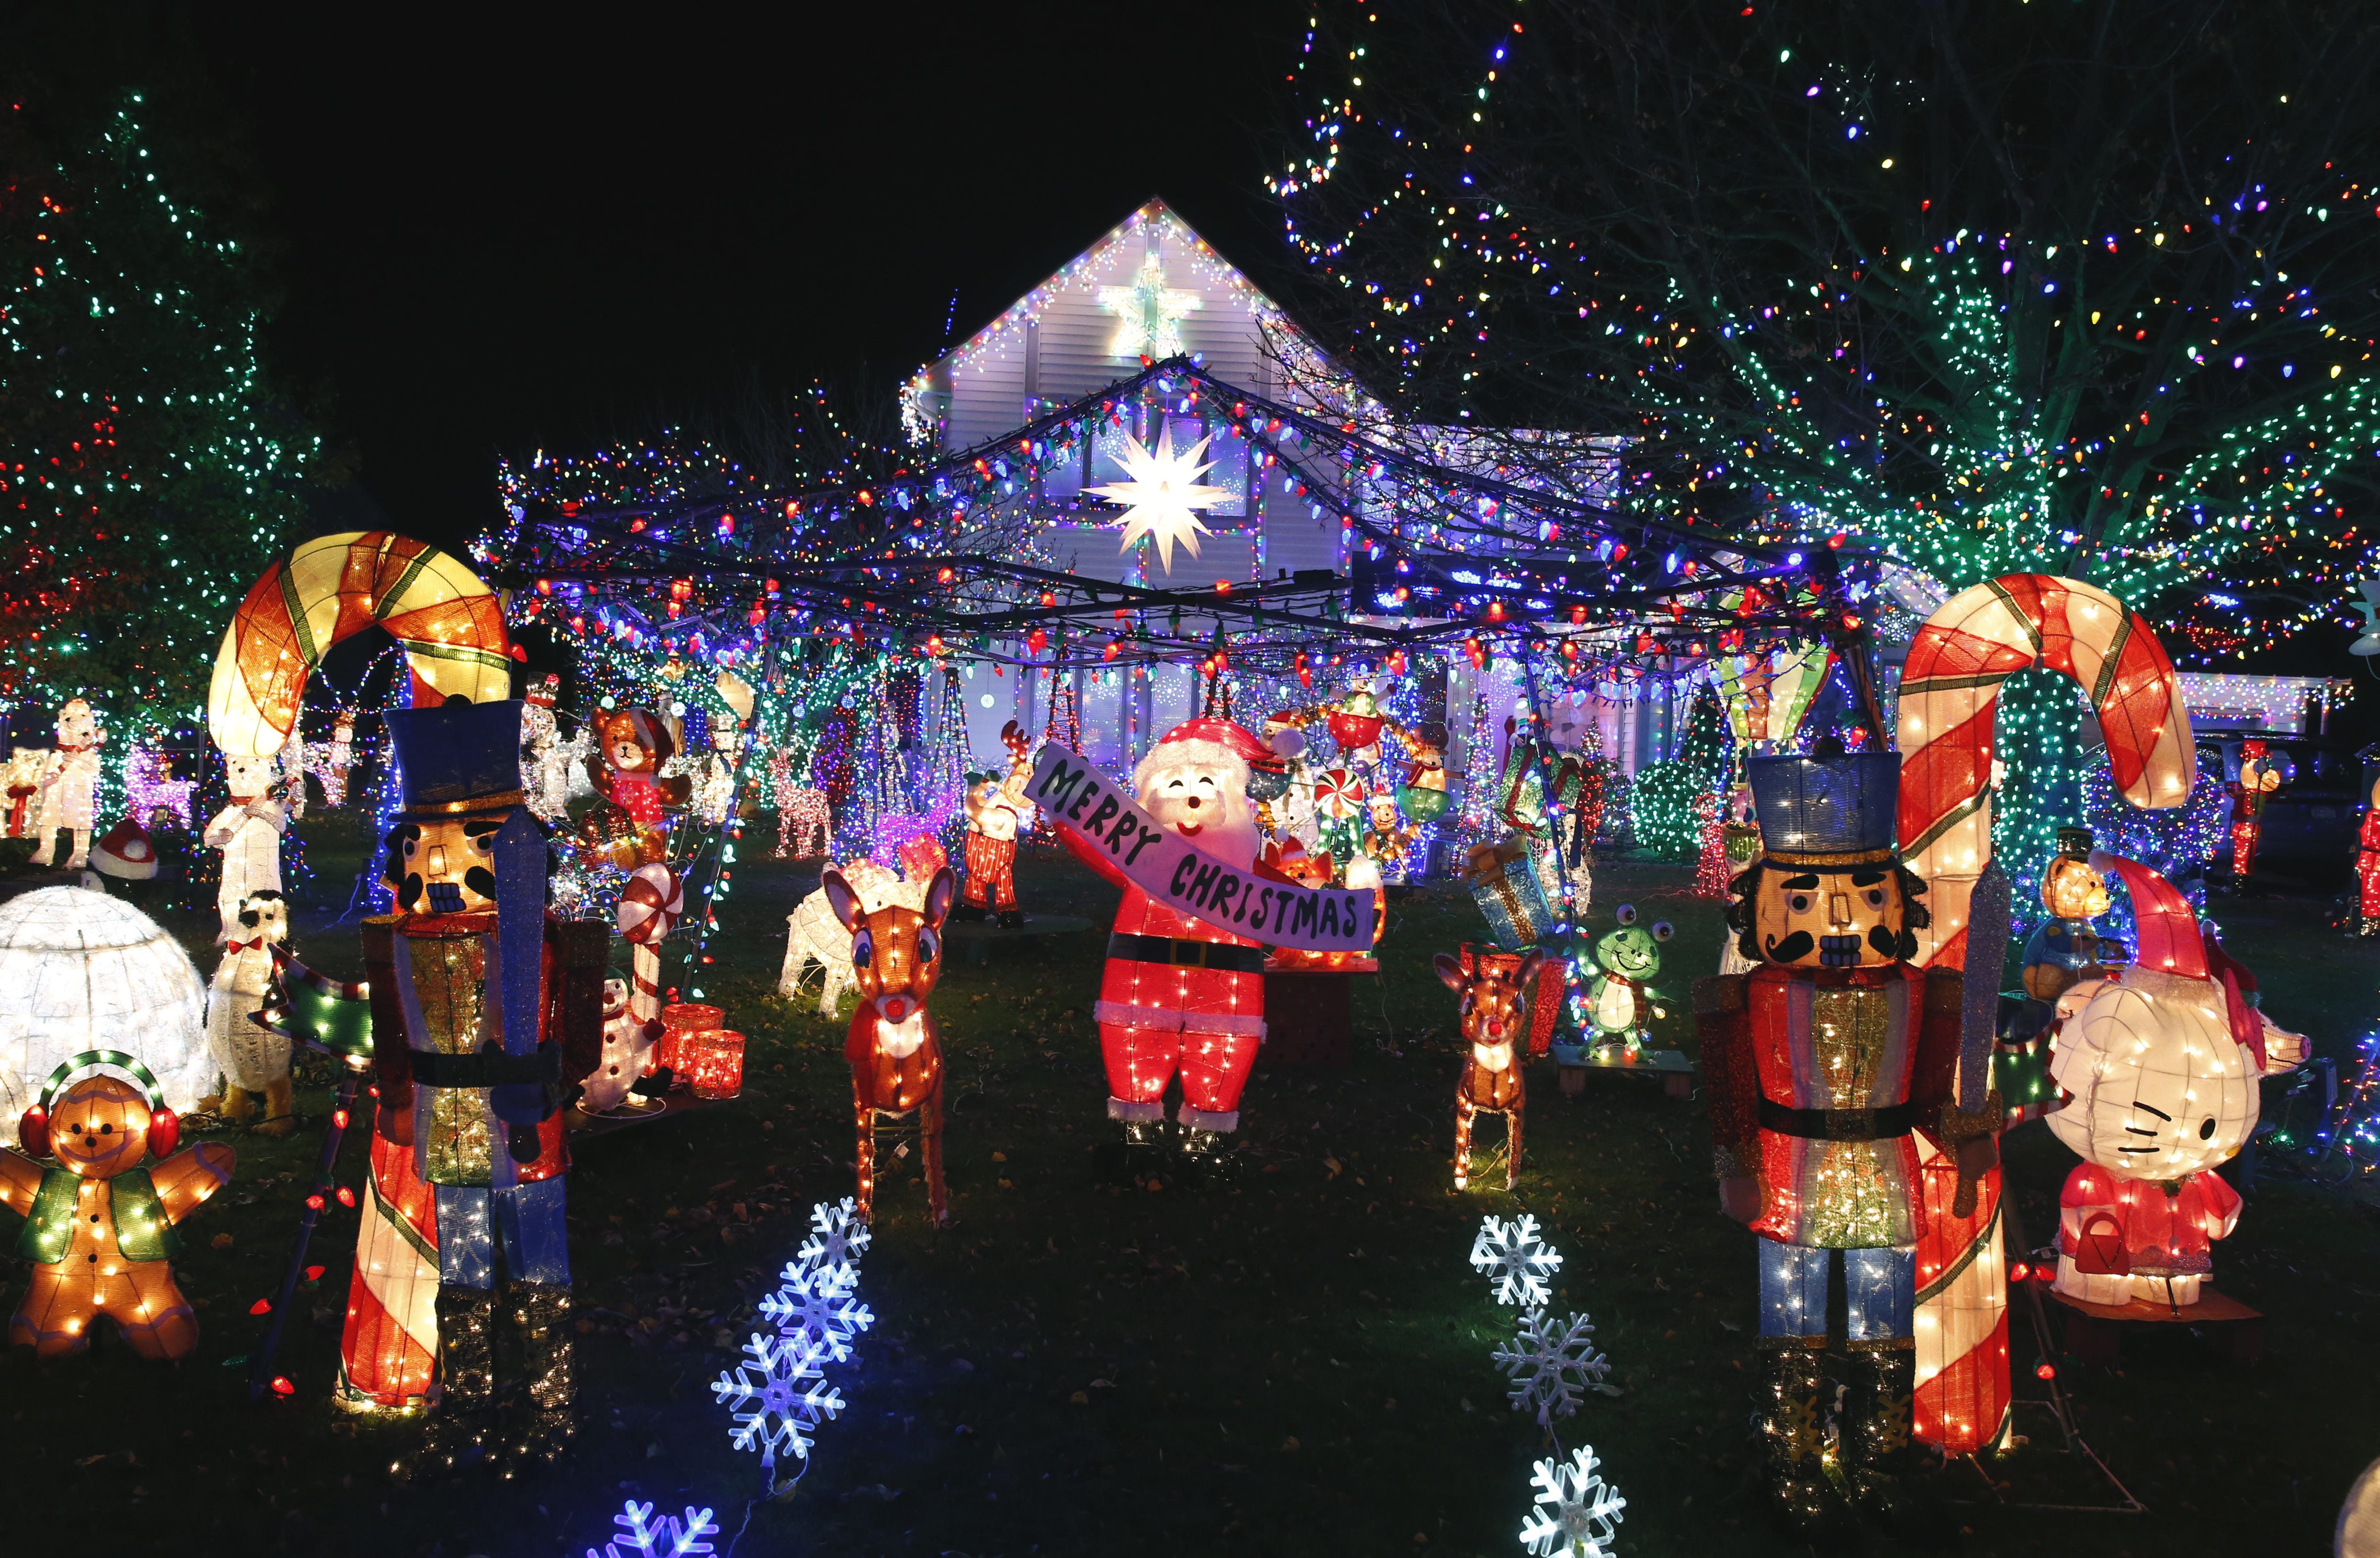 Penfield Christmas light display includes 50,000 bulbs and 13 years of countless memories